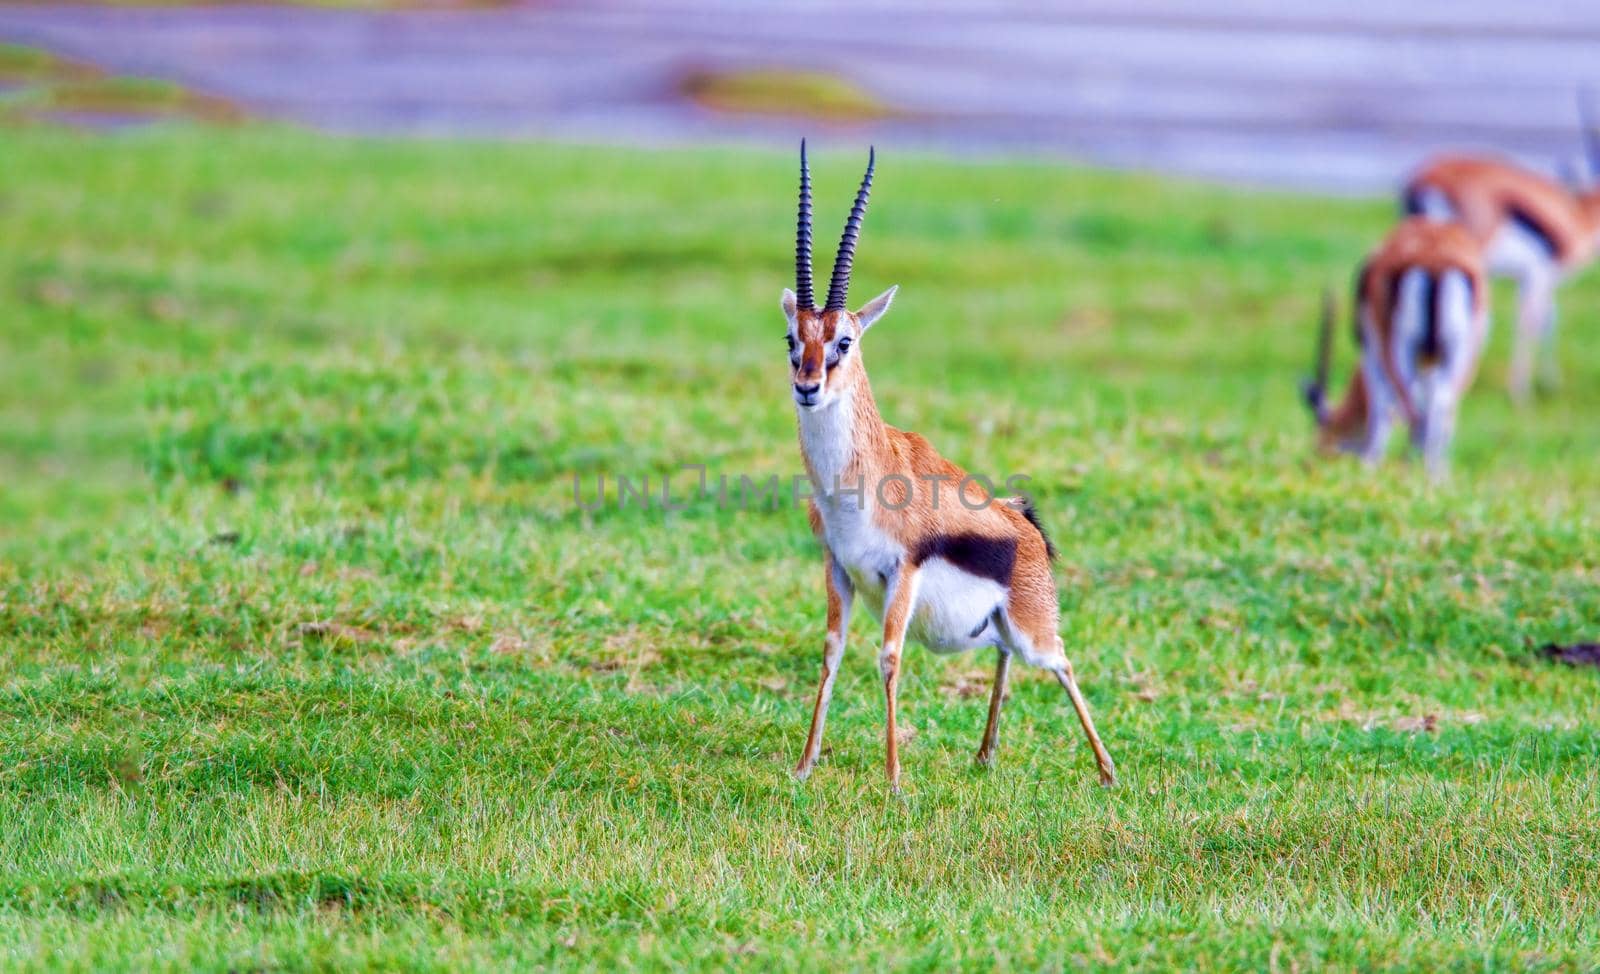 Tomashon Gazelle, or Tommy, is a type of ghazal common in Kenya and Tanzania. Named after the Scottish explorer of Africa, Joseph Thomson